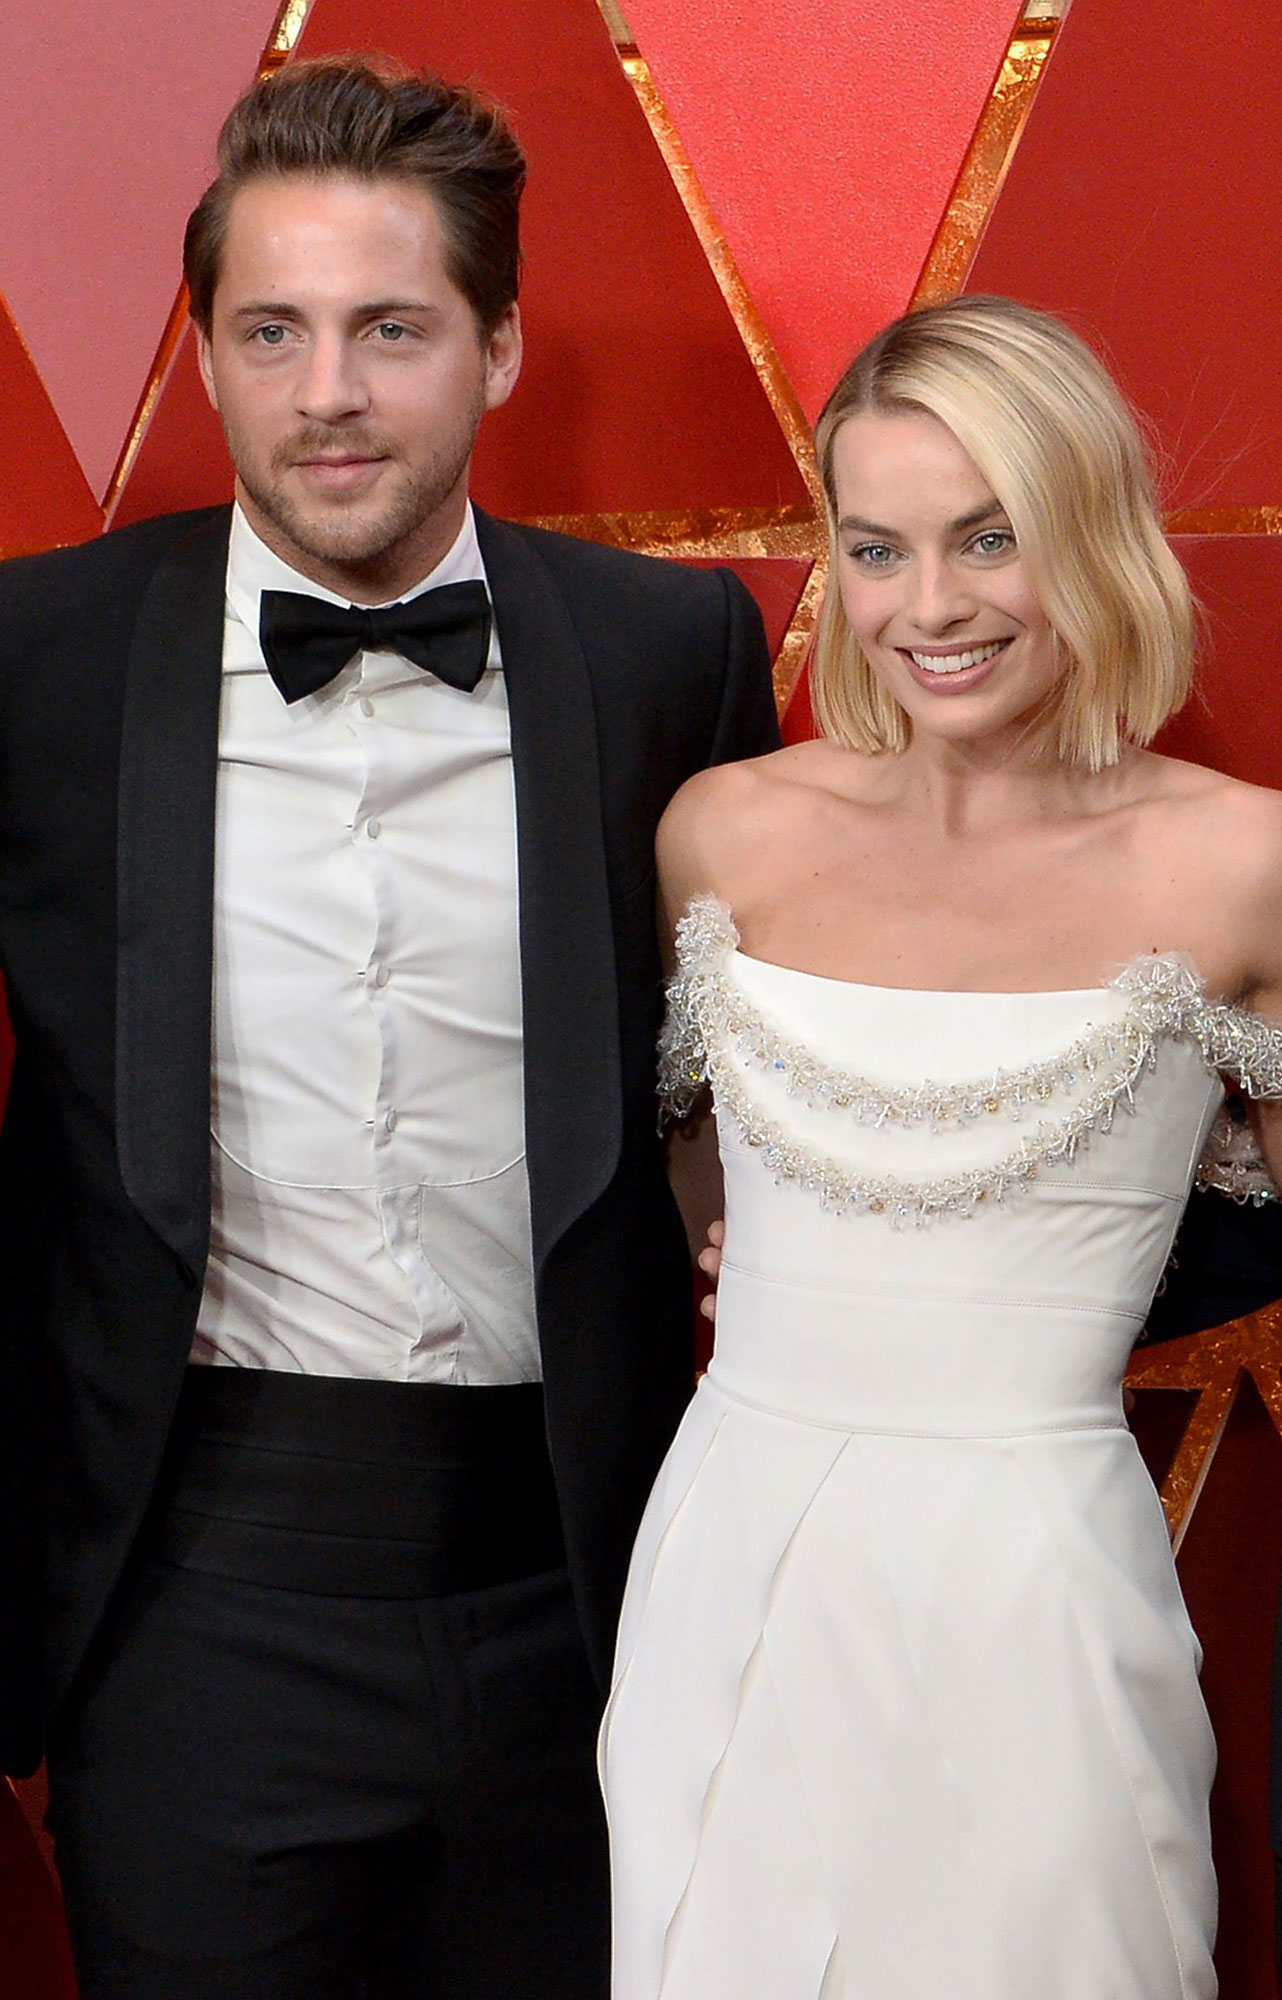 Margot Robbie and Husband Tom Ackerley's Relationship Timeline: Inside Their Low-Key Marriage 2018